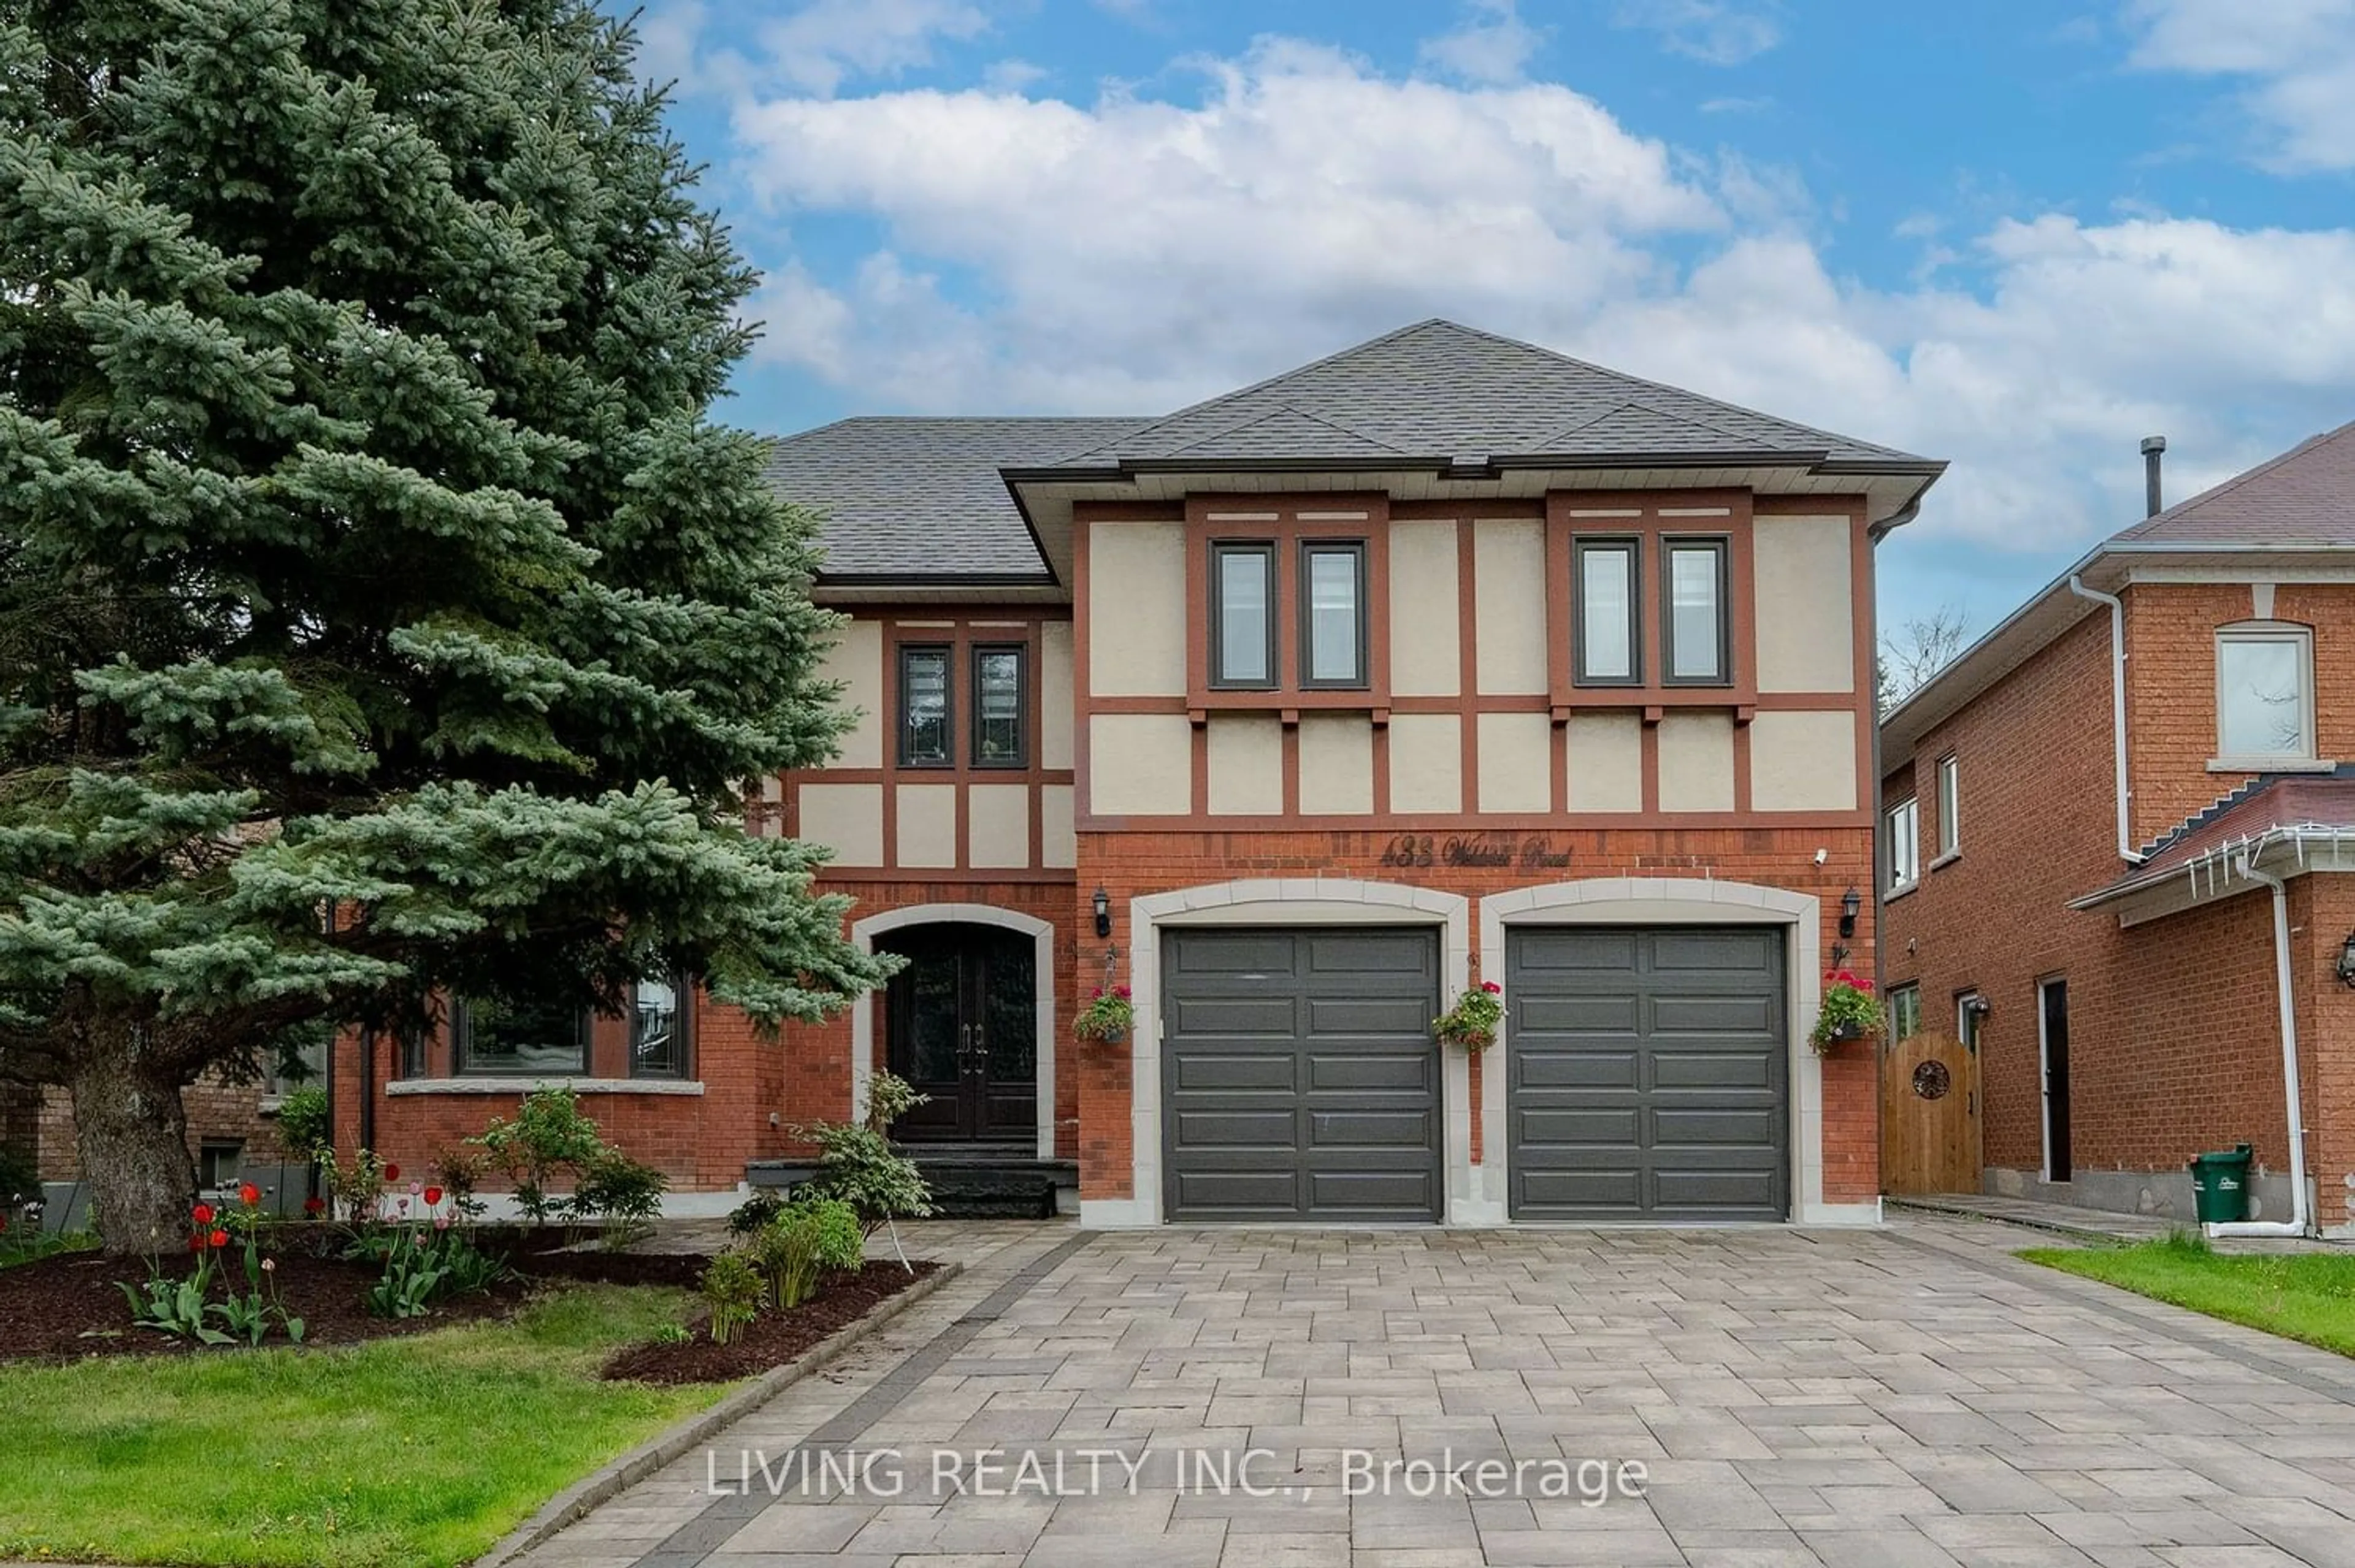 Home with brick exterior material for 433 Weldrick Rd, Richmond Hill Ontario L4B 2M5